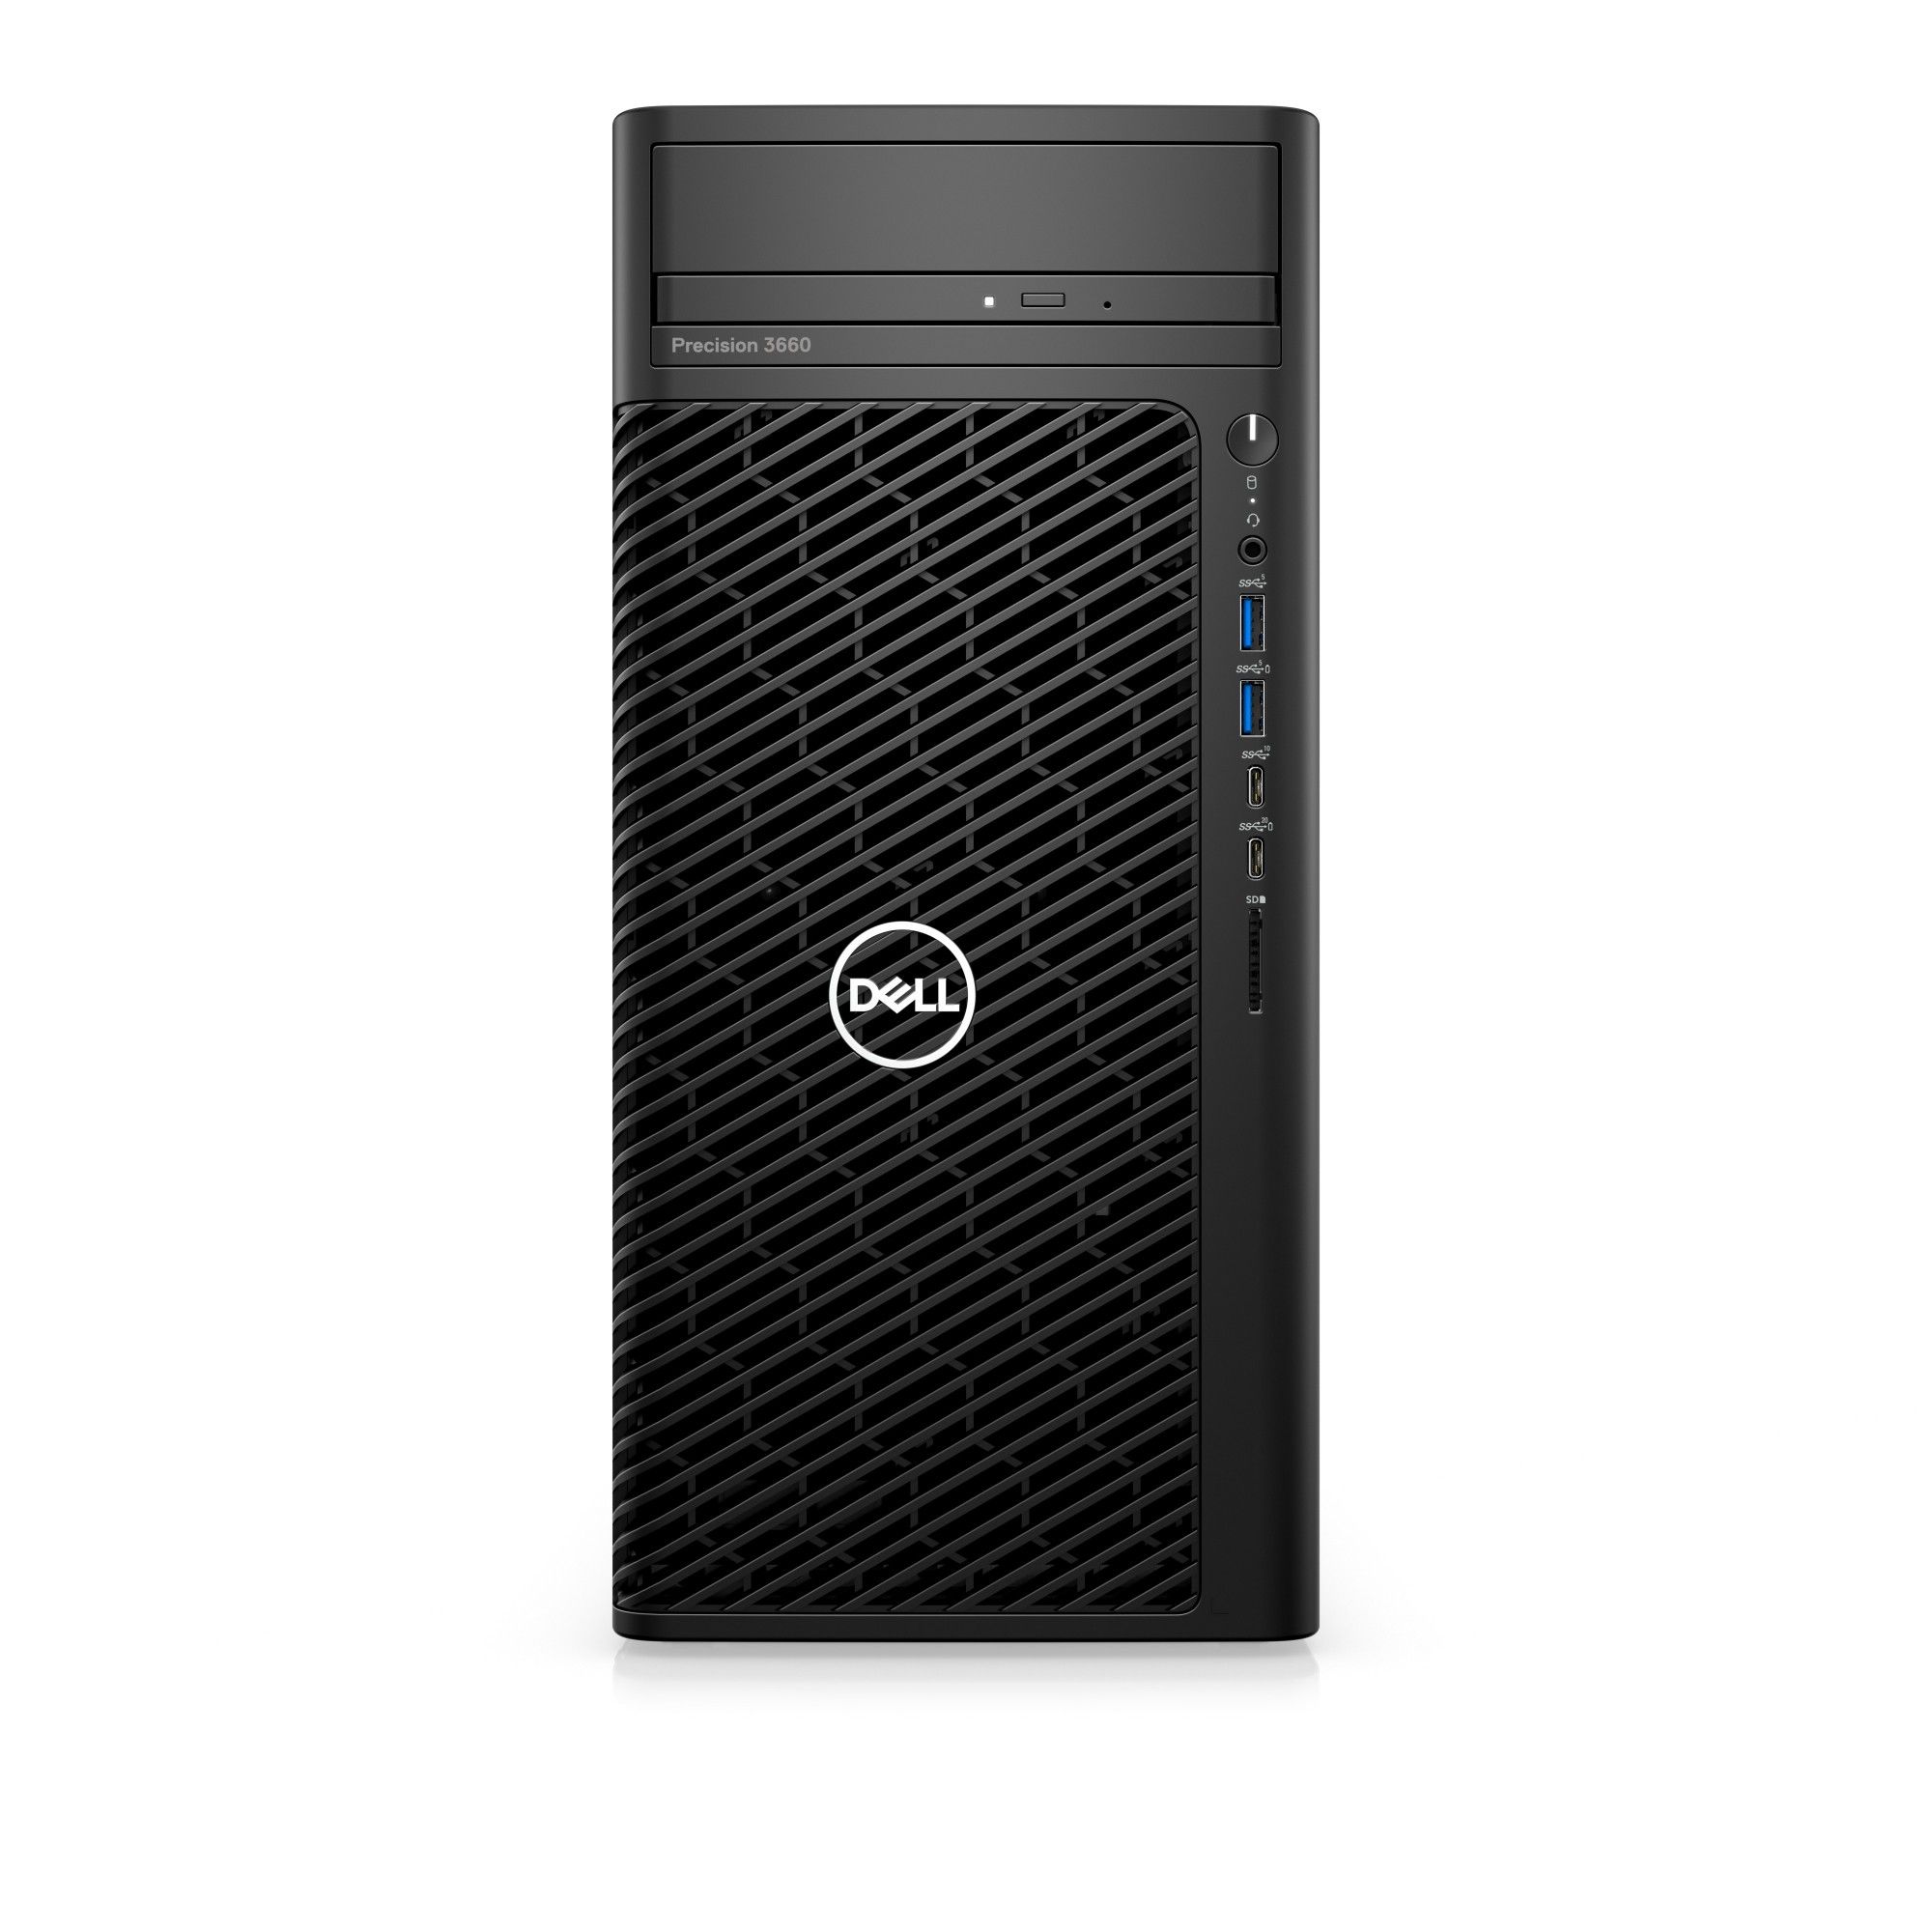 Dell Precision 3660 Tower,Intel Core i9-13900K(36MB, 24Core(8+16),3.0GHz/5.8GHz),64GB(2x32)4400MHz DDR5,1TB(M.2)NVMe PCIe SSD,noDVD,Nvidia GeForce RTX 4090/24GB,noWi-Fi,Dell Mouse-MS116,Dell Keyboard-KB216,Win11Pro,3Yr NBD_1